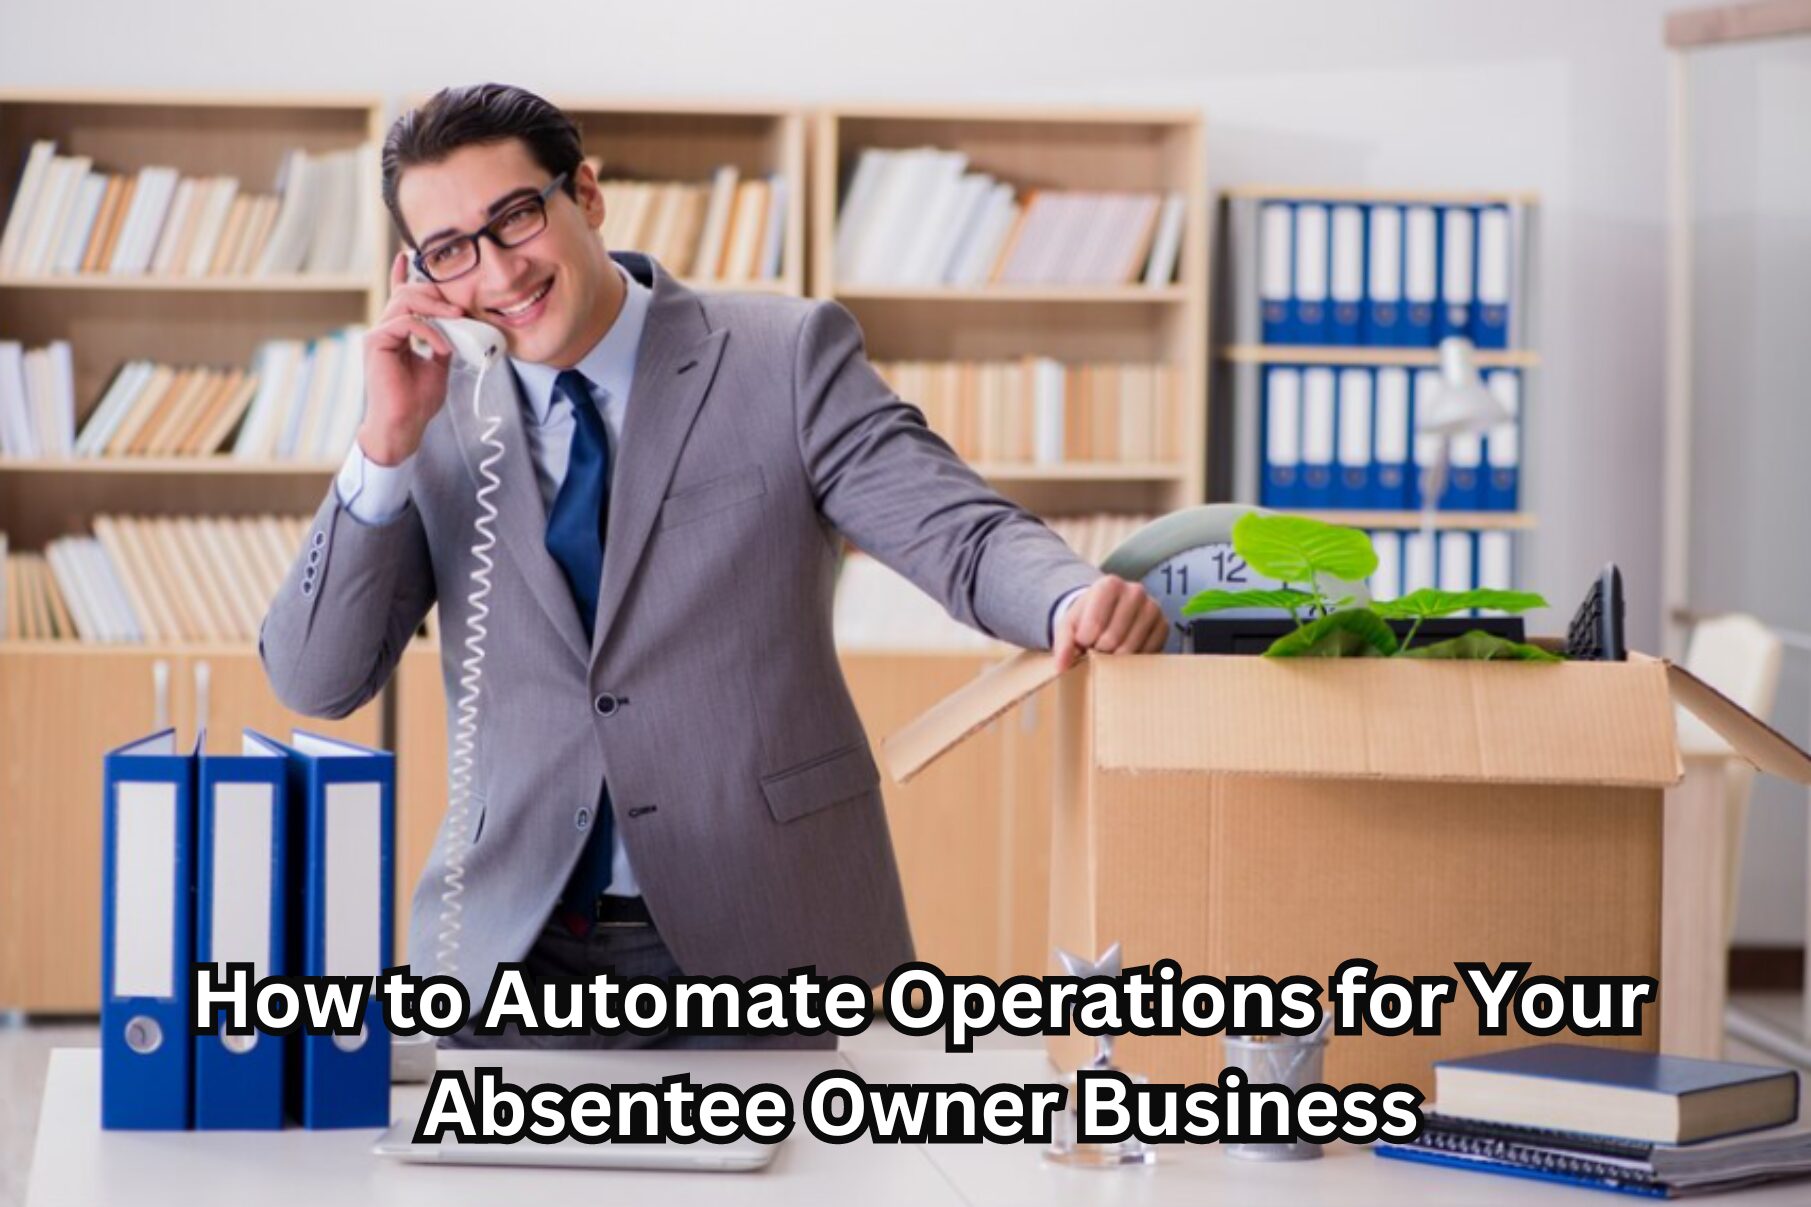 Absentee owner overseeing business remotely, managing operations and team efficiently from a distance.